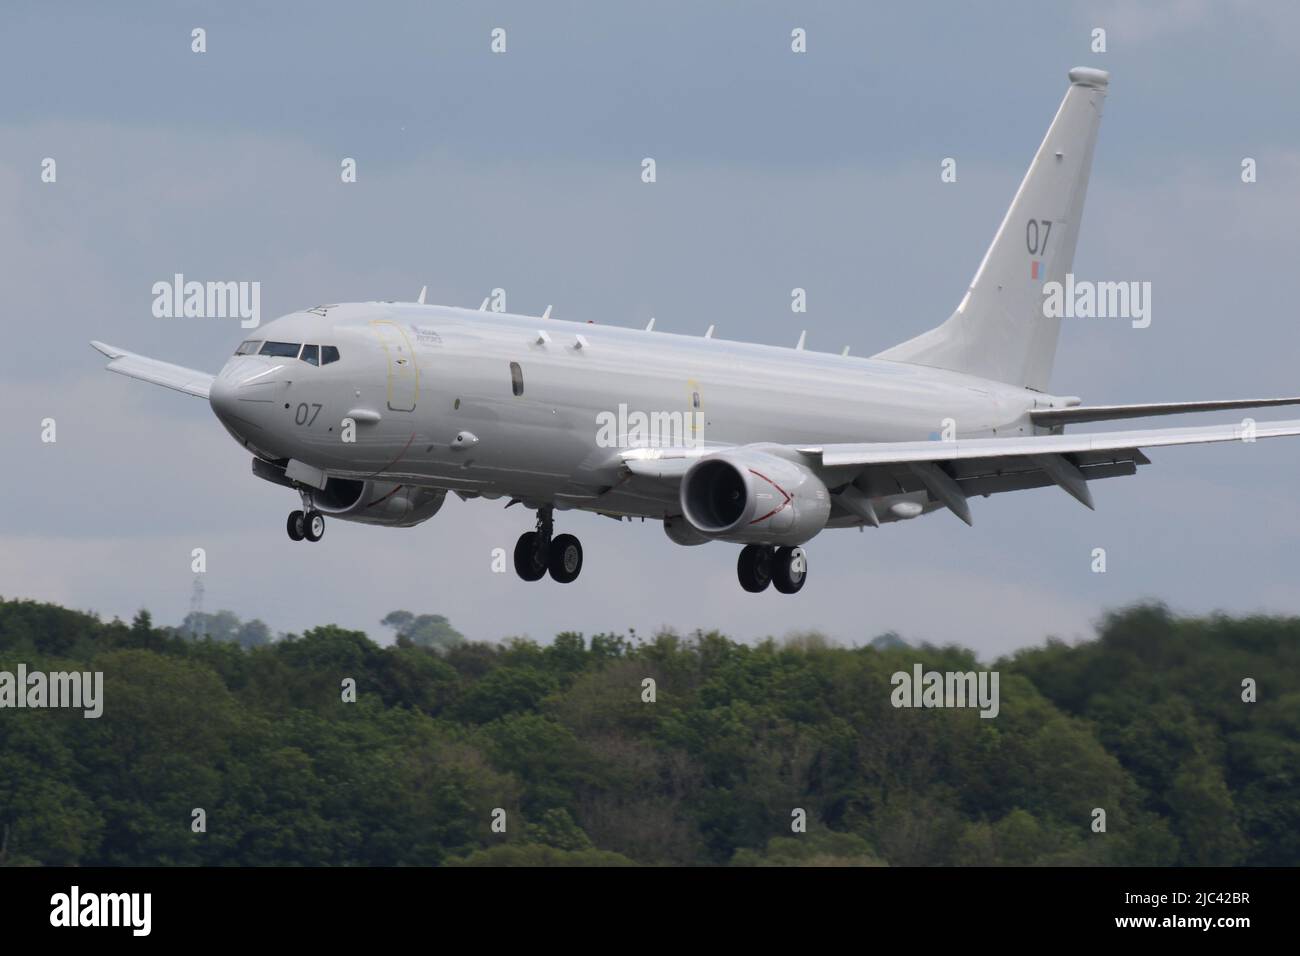 ZP807 'William Barker VC', a Boeing Poseidon MRA1 operated by the Royal Air Force in the maritime patrol role, during training flights at Prestwick International Airport in Ayrshire, Scotland. Stock Photo